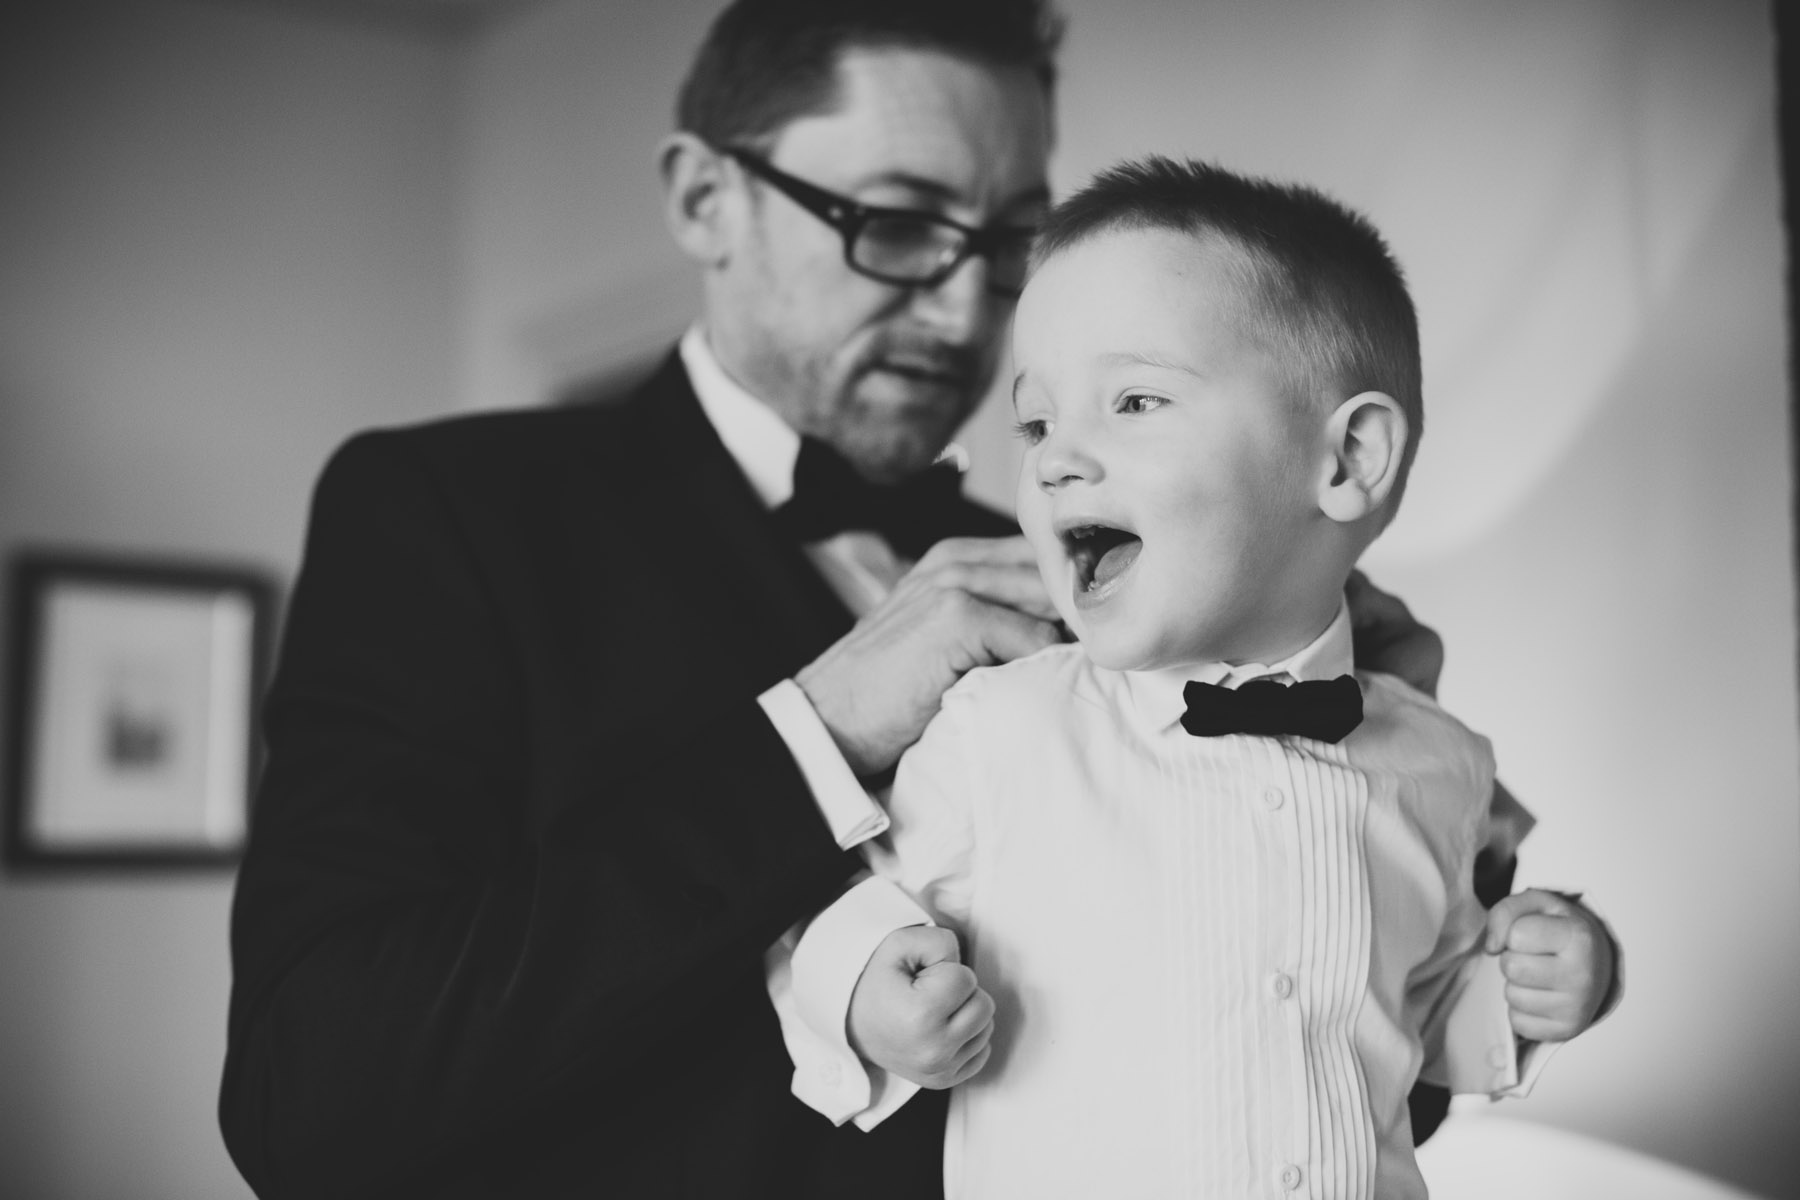 Colette & Paul - Family wedding with Kids - Winter